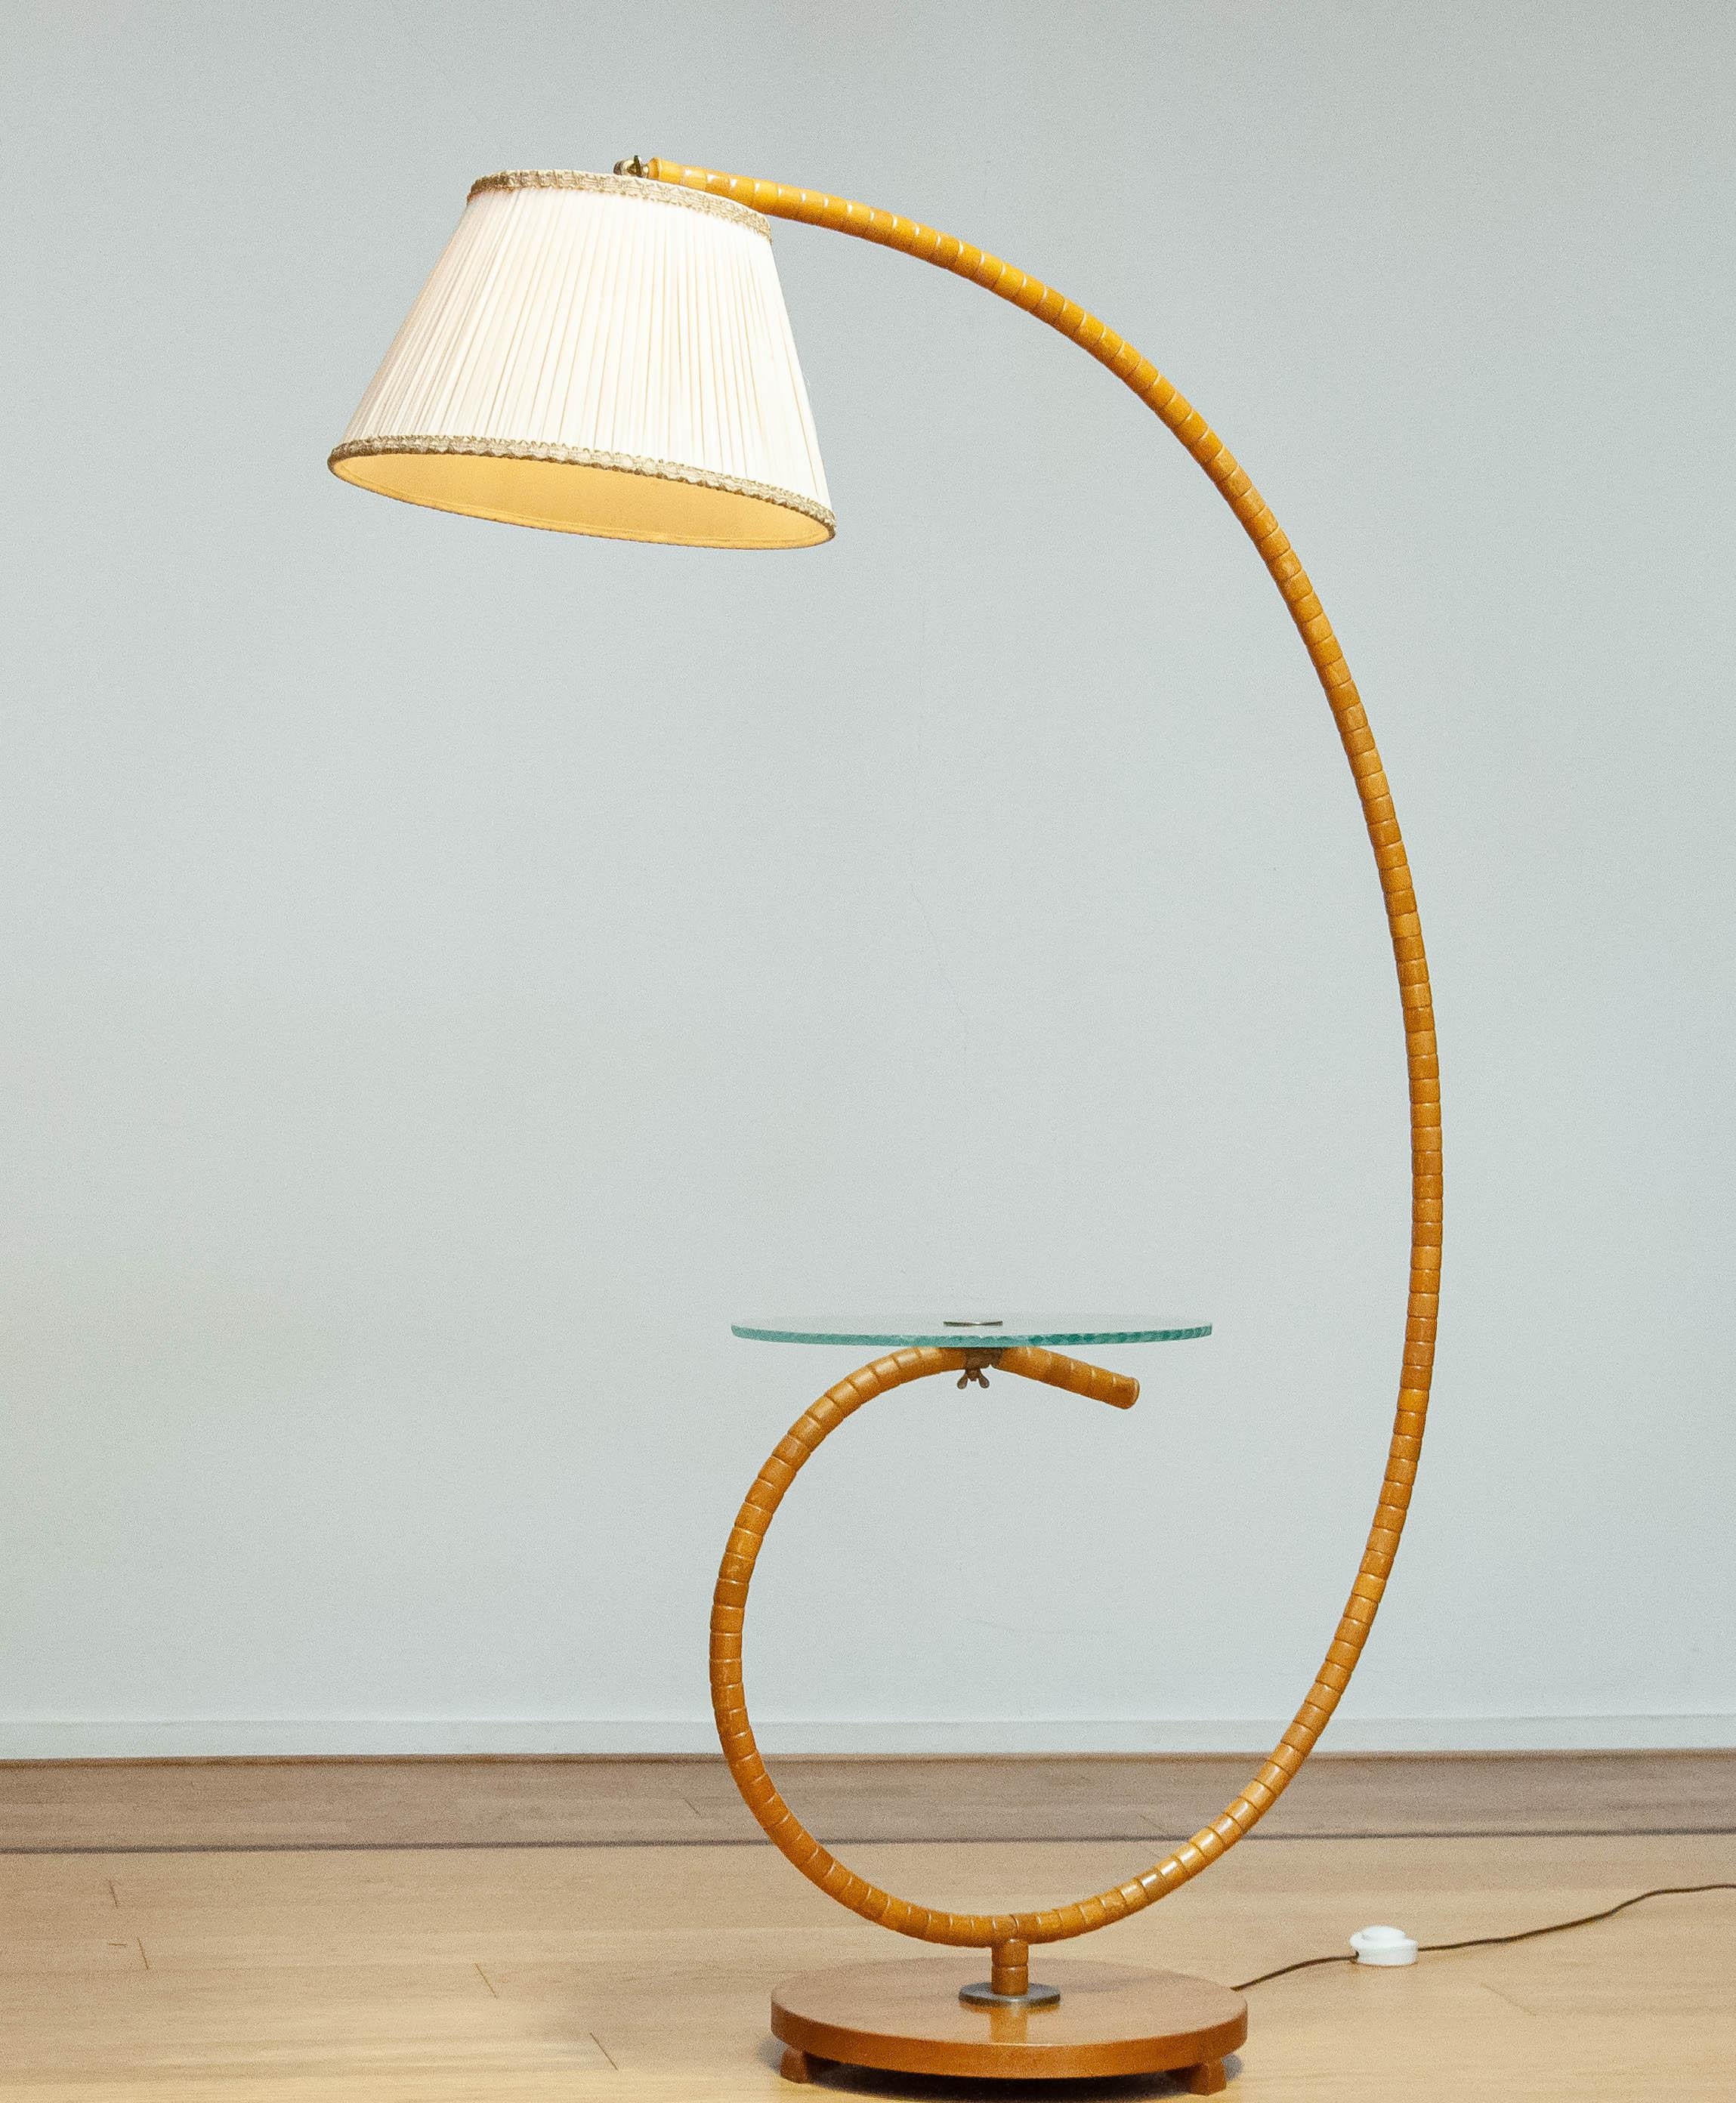 1940 Swedish Art Nouveau Floor Lamp In Elm With Art Glass Table By IWO Mariestad In Good Condition For Sale In Silvolde, Gelderland